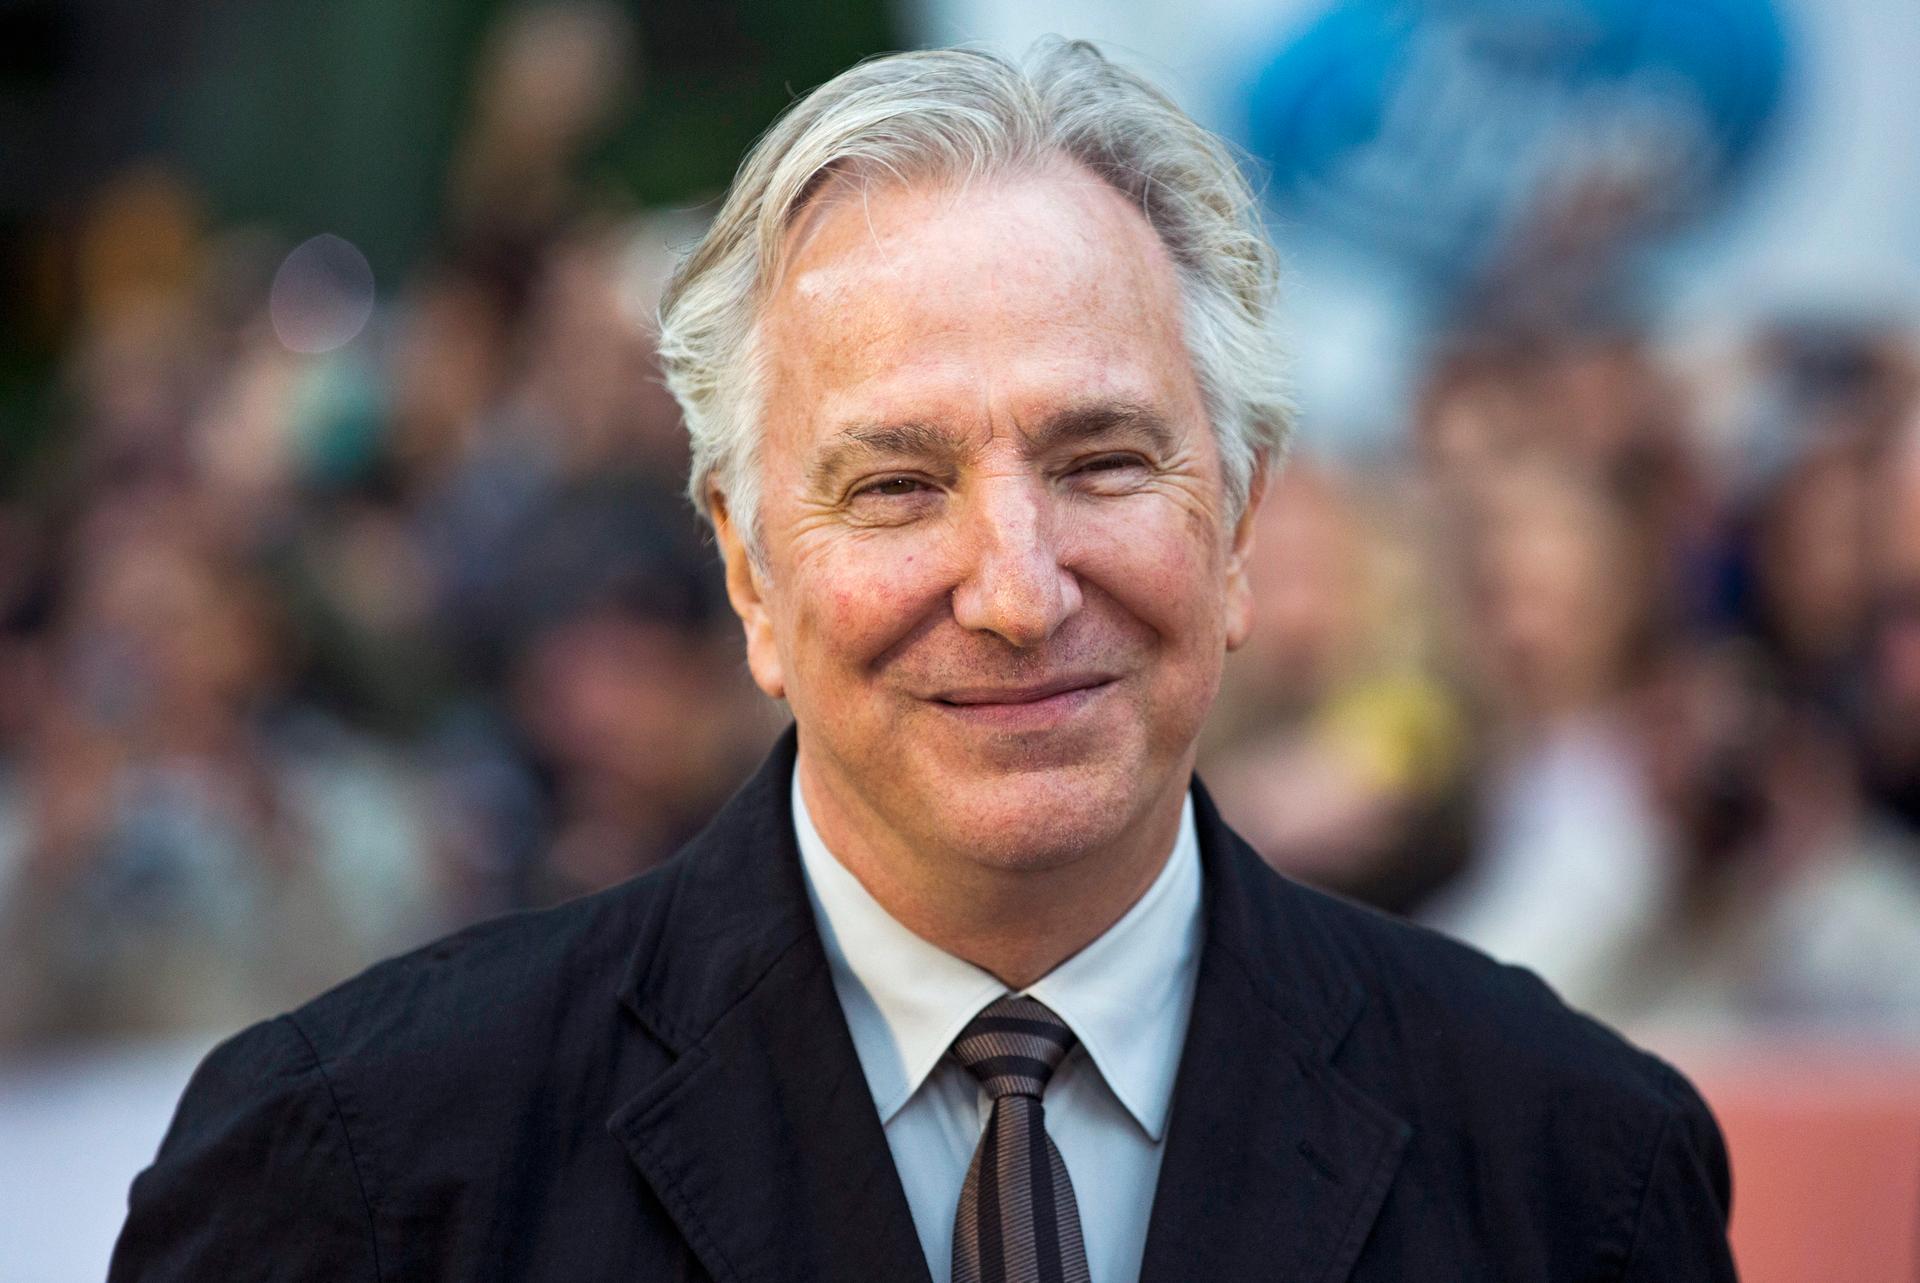 Director Alan Rickman arrives for the "A Little Chaos" gala during the Toronto International Film Festival.